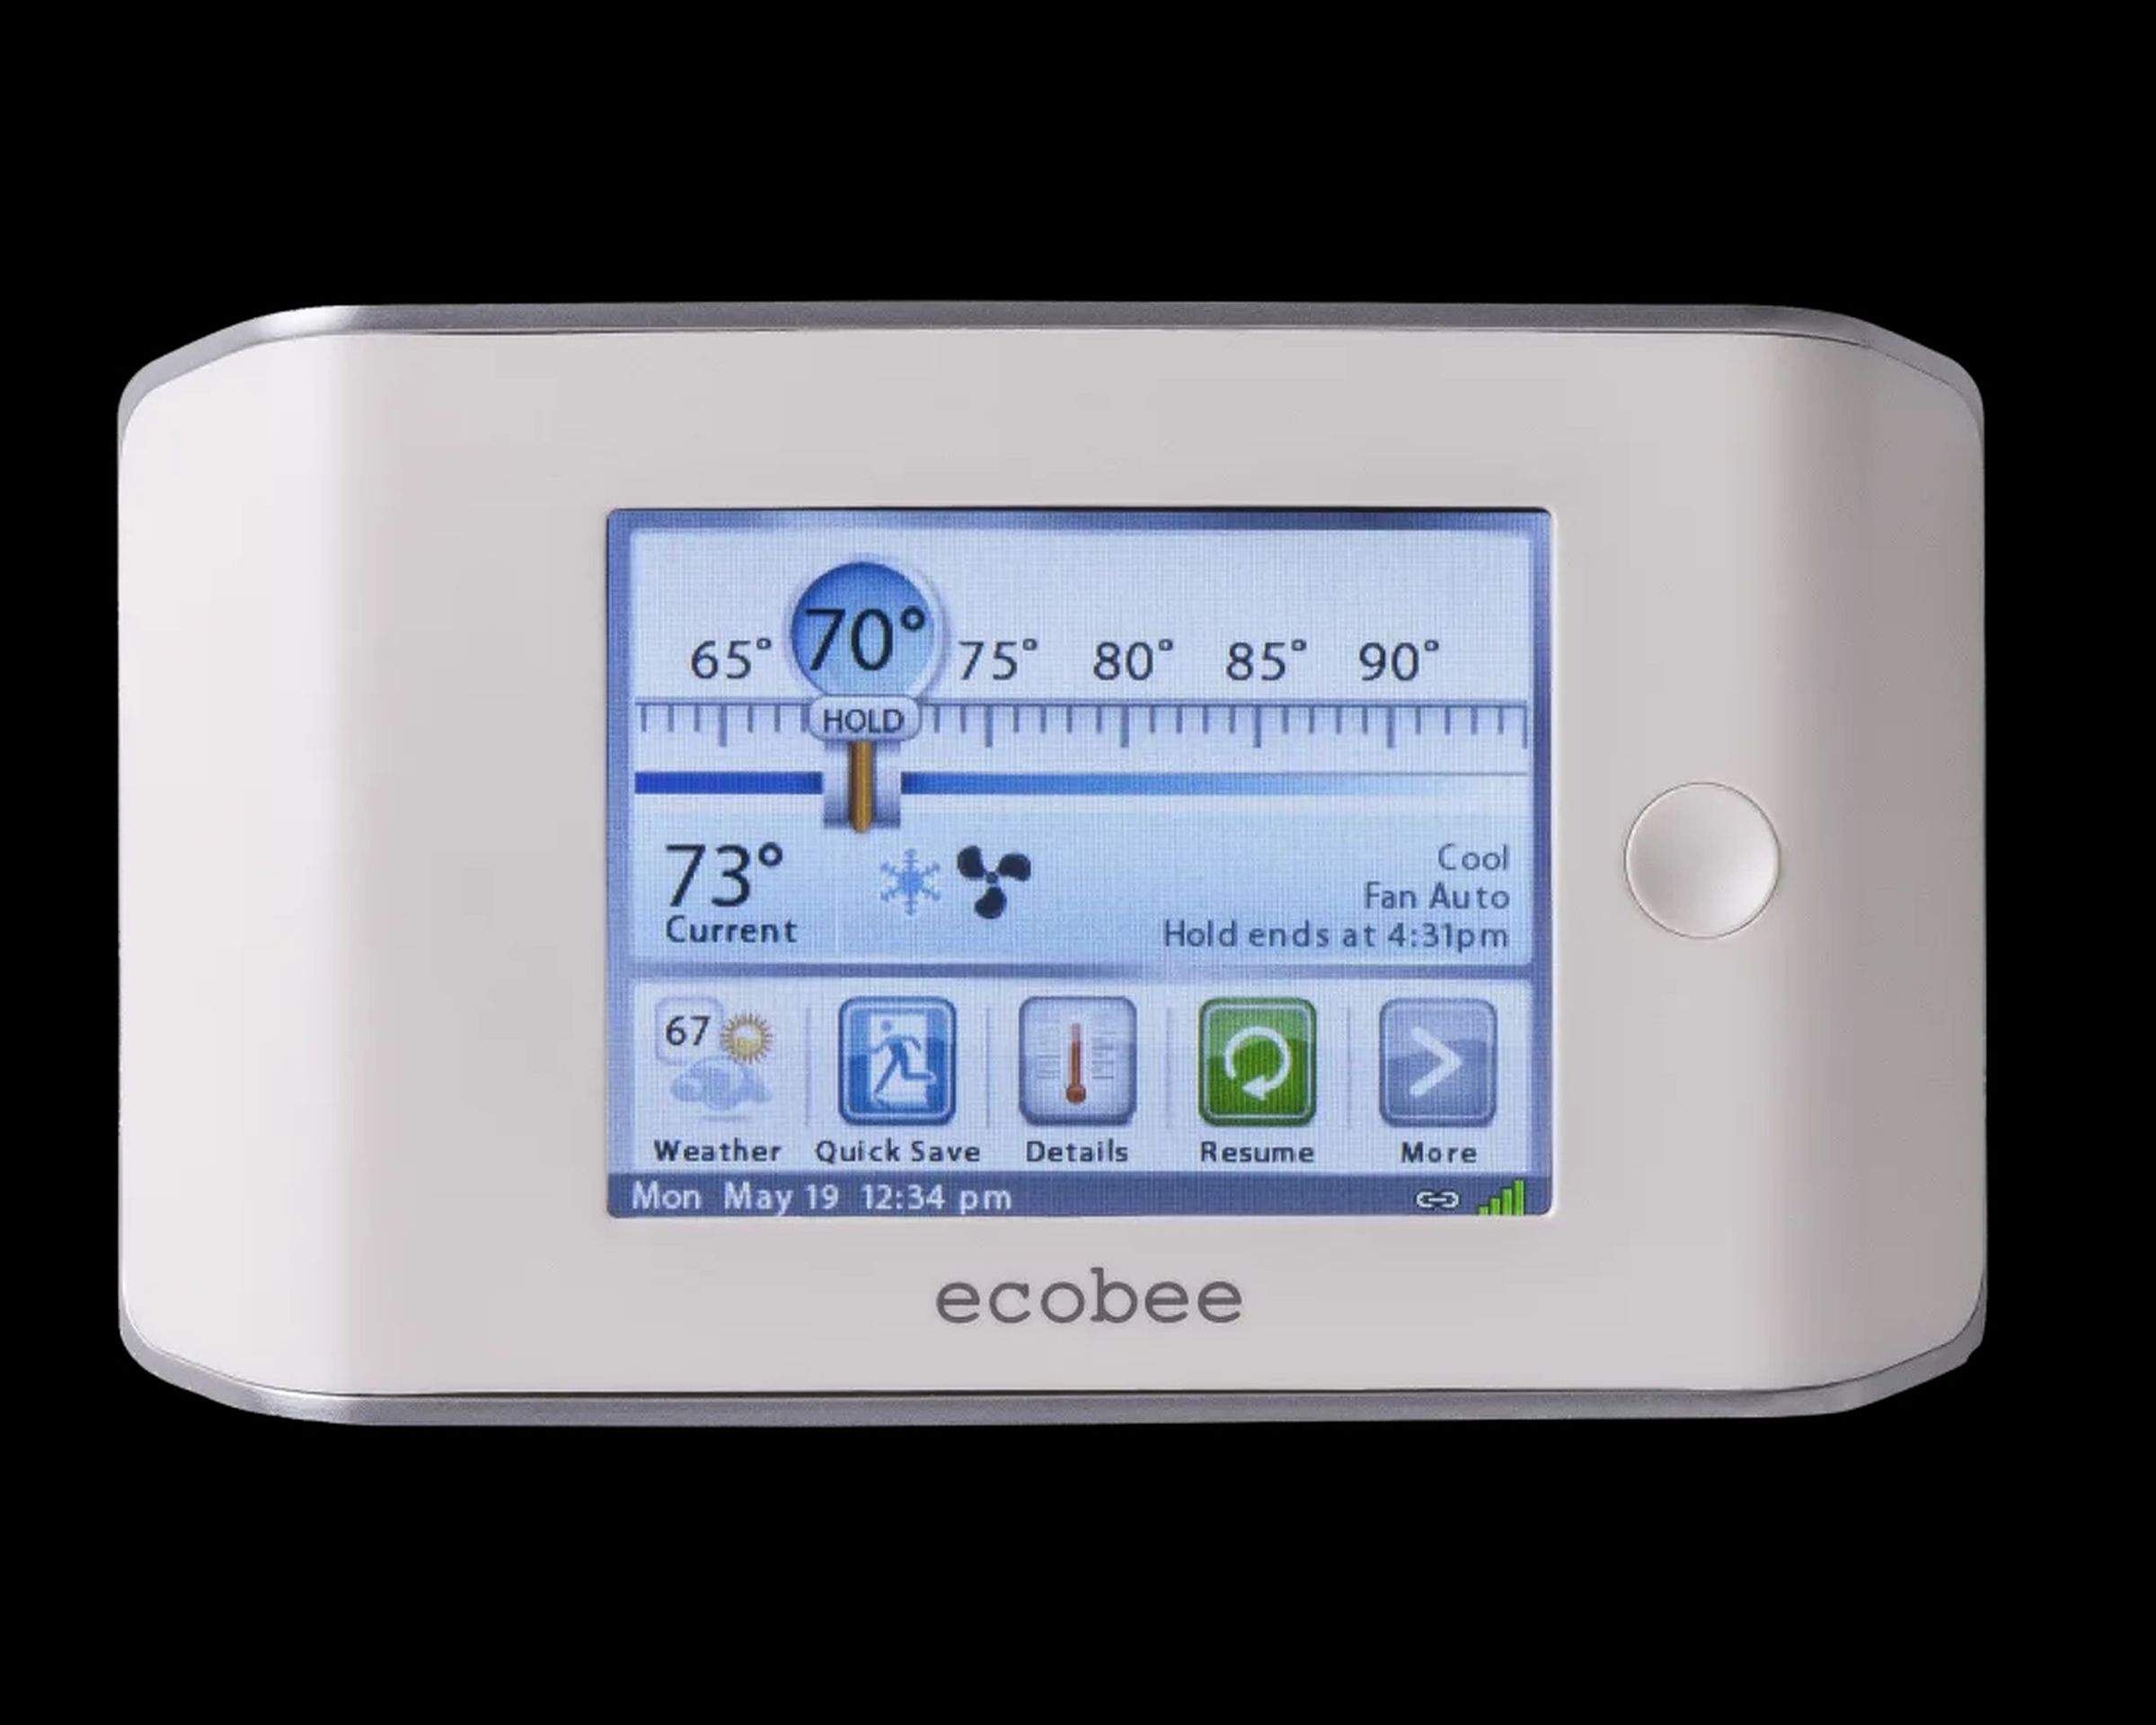 The Ecobee Smart Thermostat will lose its smarts on July 31st.